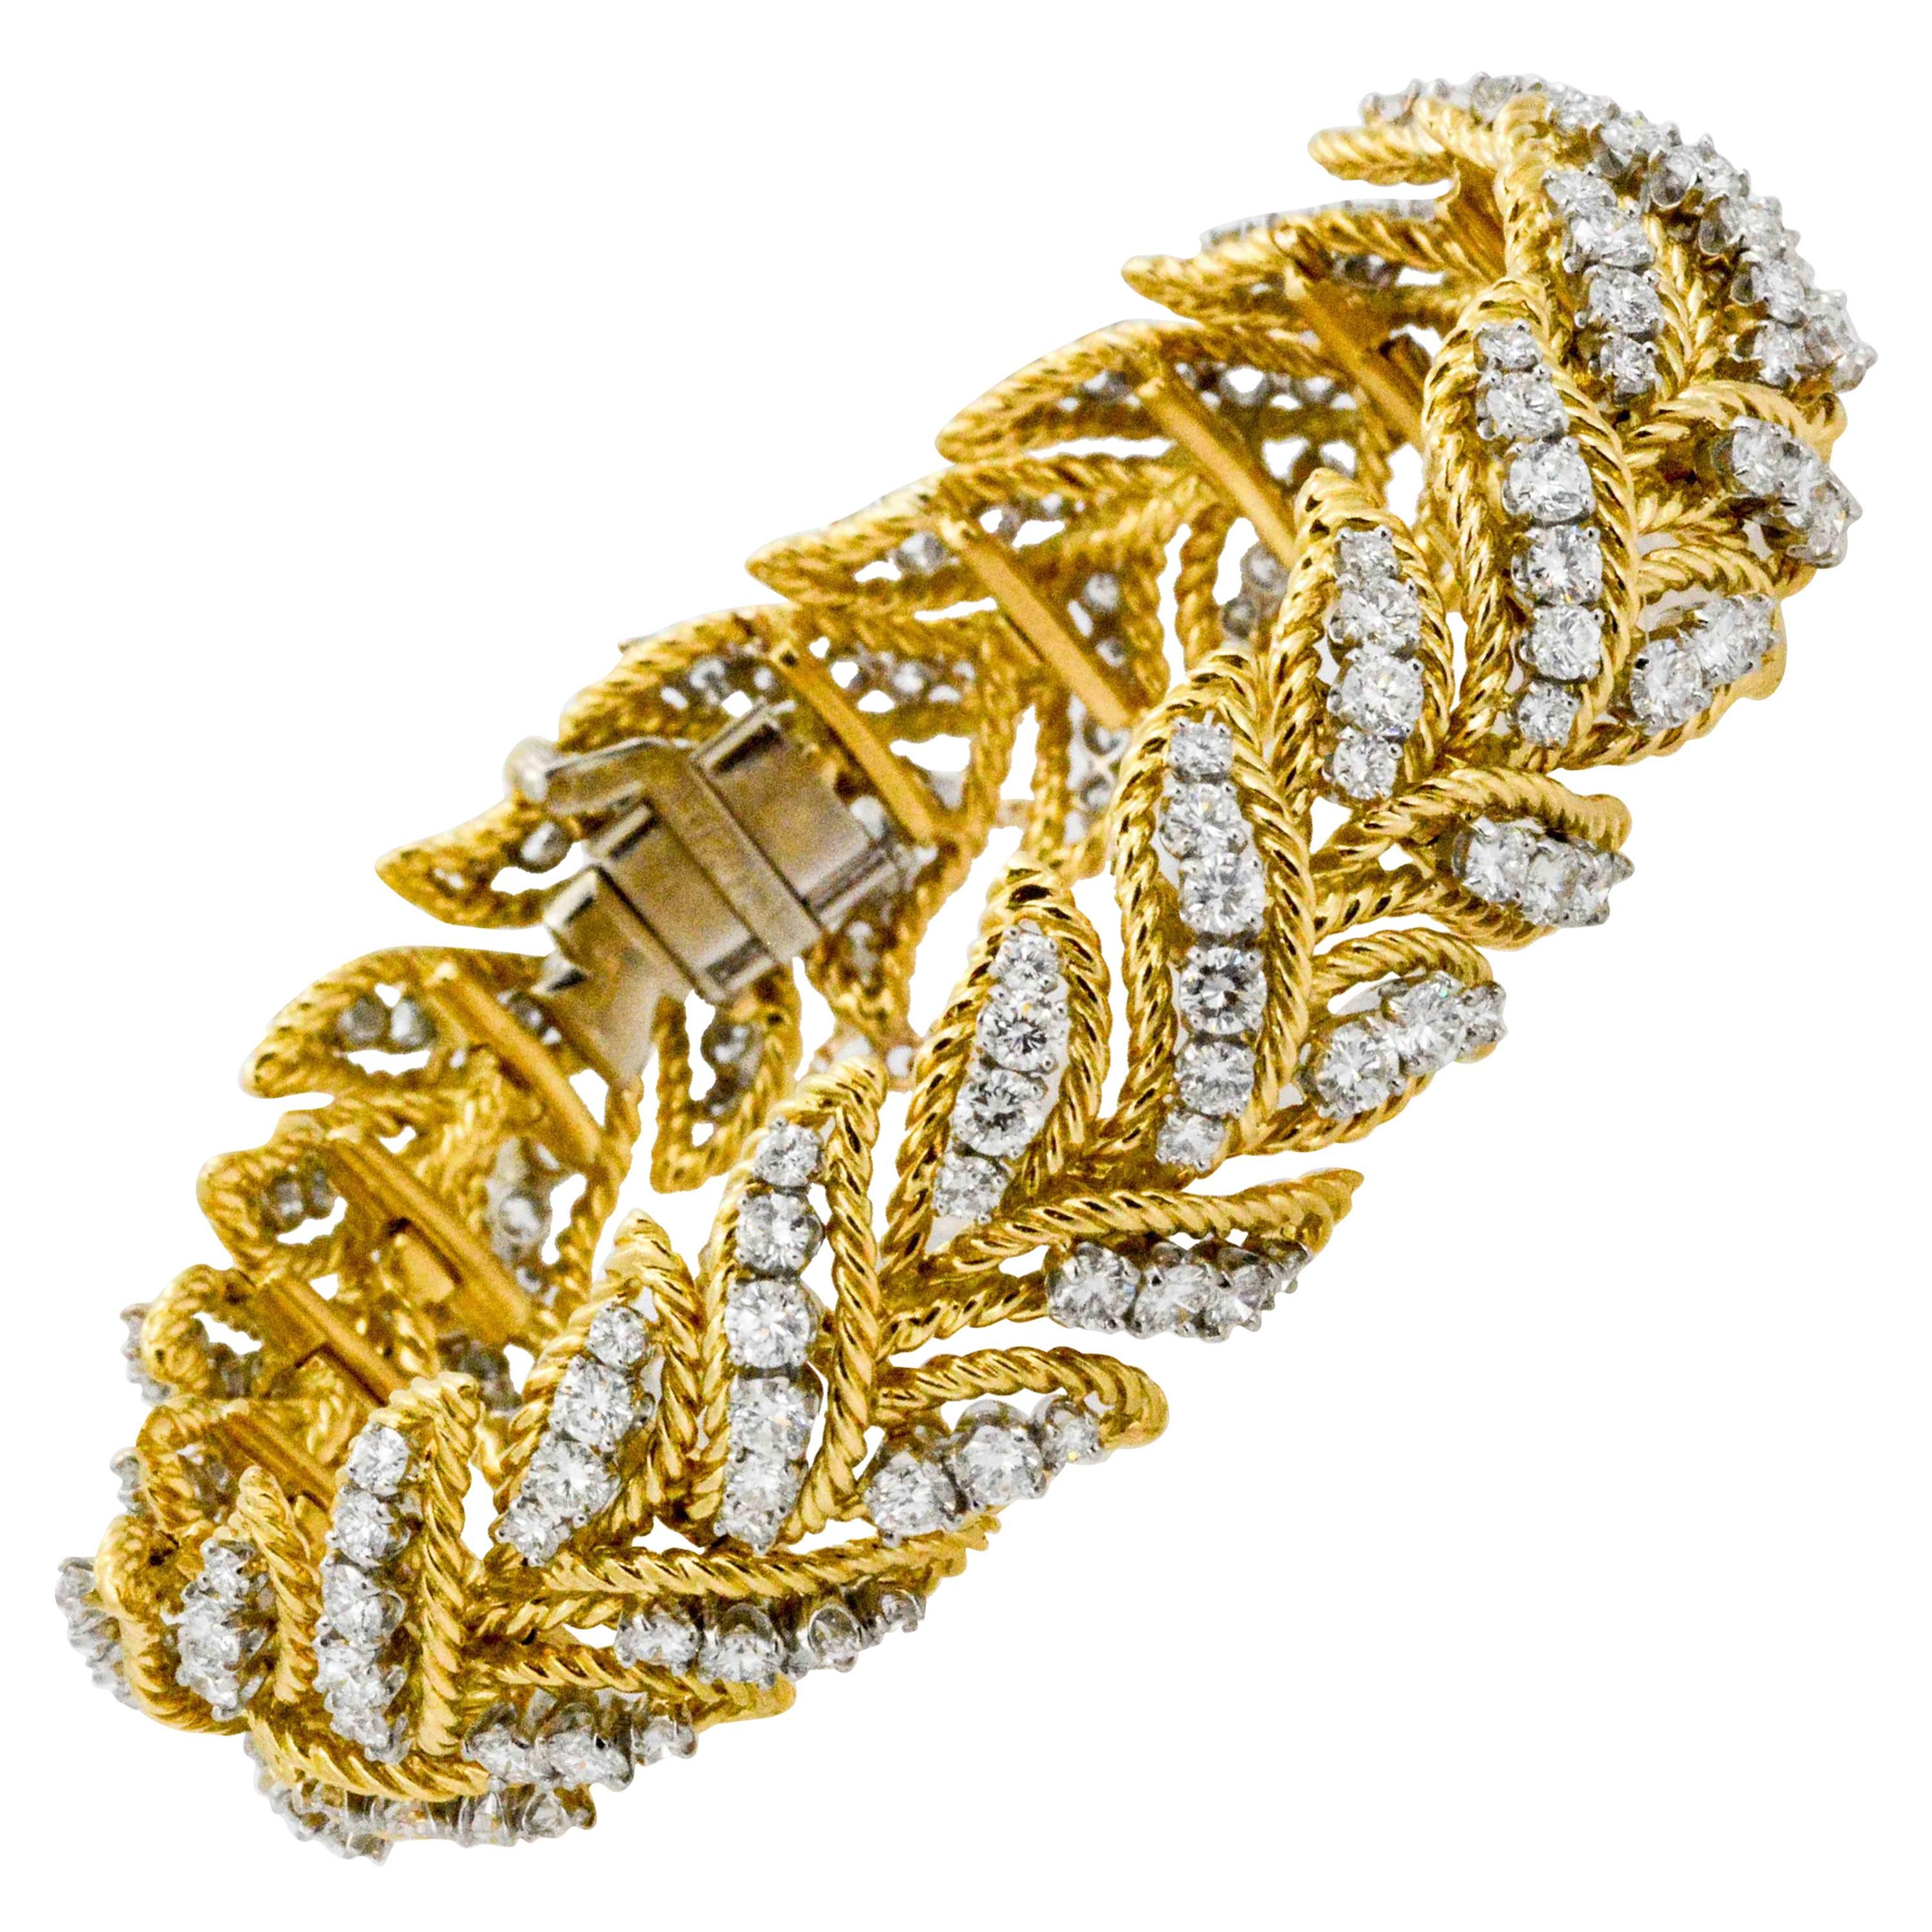 Created in France during the 1960's, this provocative retro, modern bracelet still has exquisite style. 18 Karat yellow gold ropes its way between and around 189 round diamonds (9.00 ctw). This leaf-look bracelet measures 7.5 inches in length, has a